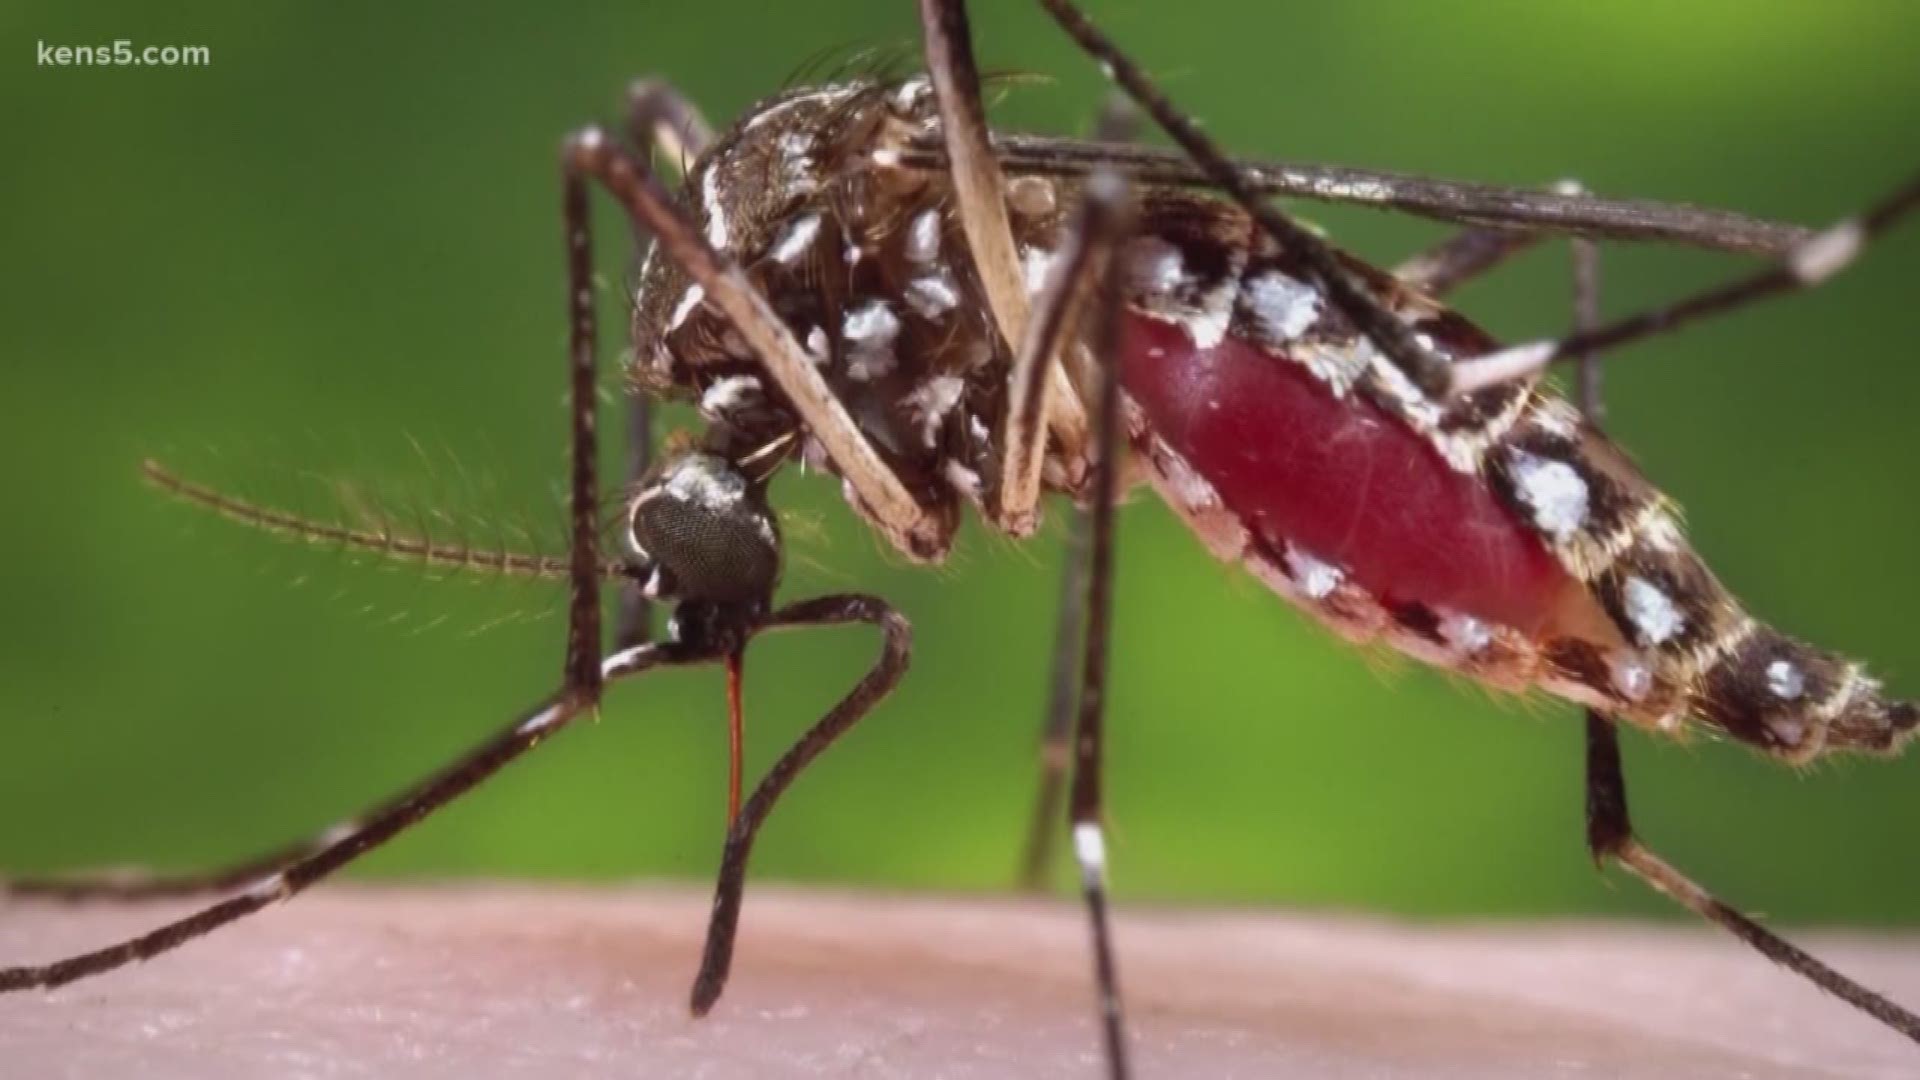 The WHO says mosquitos can't spread coronavirus, but you probably don't want to get bitten. A local expert offers tips to keep them out of your yard.